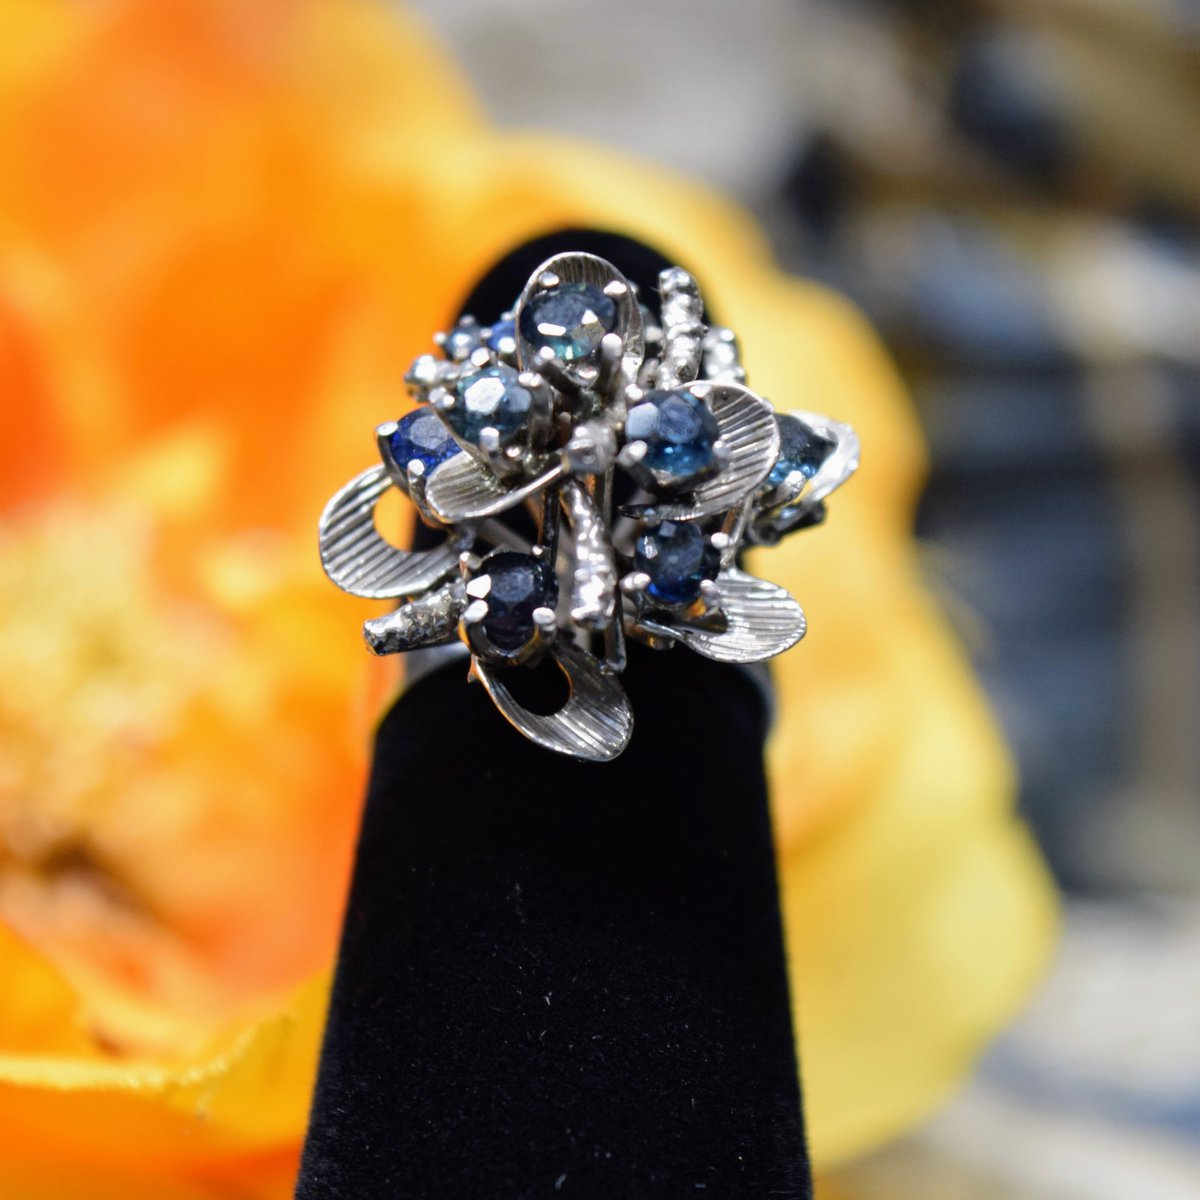 18K White Gold Floral Ring with Sapphires💠Size 6!

#Vintagejewelry #Sapphire #bluesapphire #floralring #floraljewelry #whitegold #goldjewelry #vintagegold